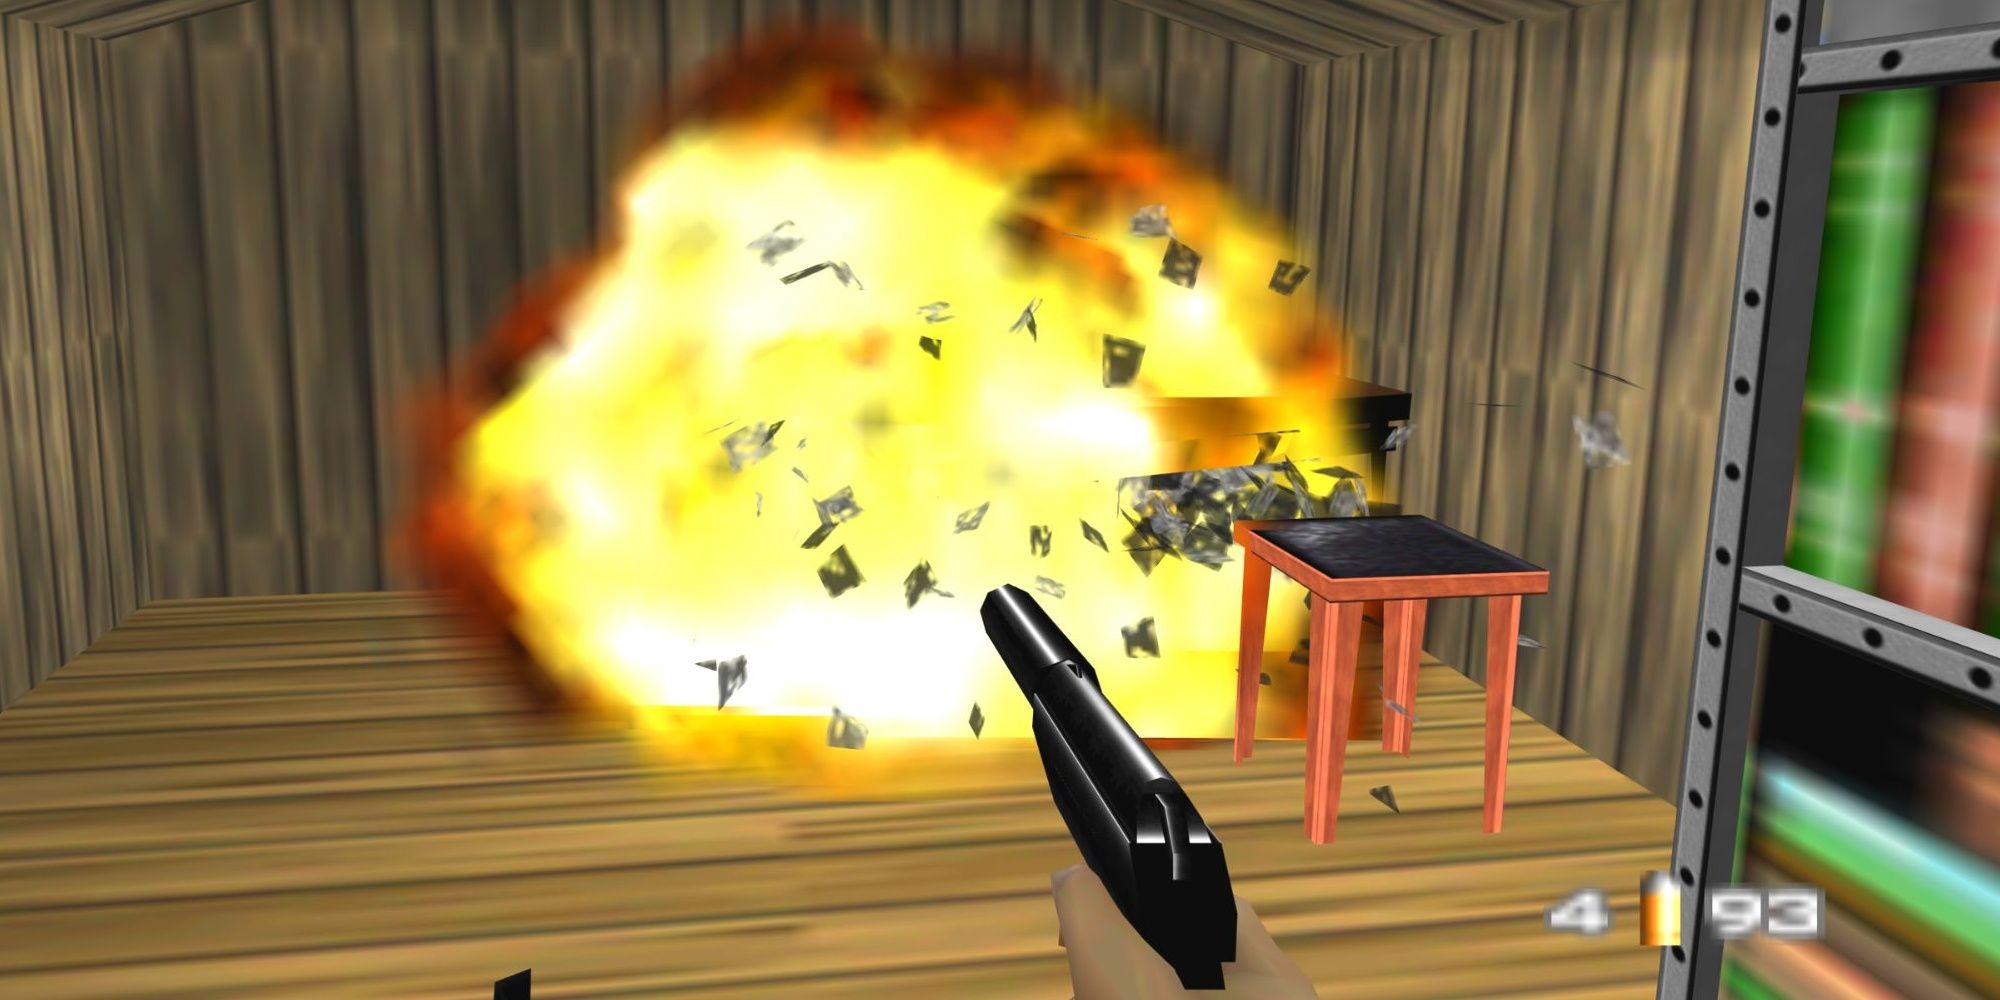 GoldenEye 007 exploded and shattered the entire table.